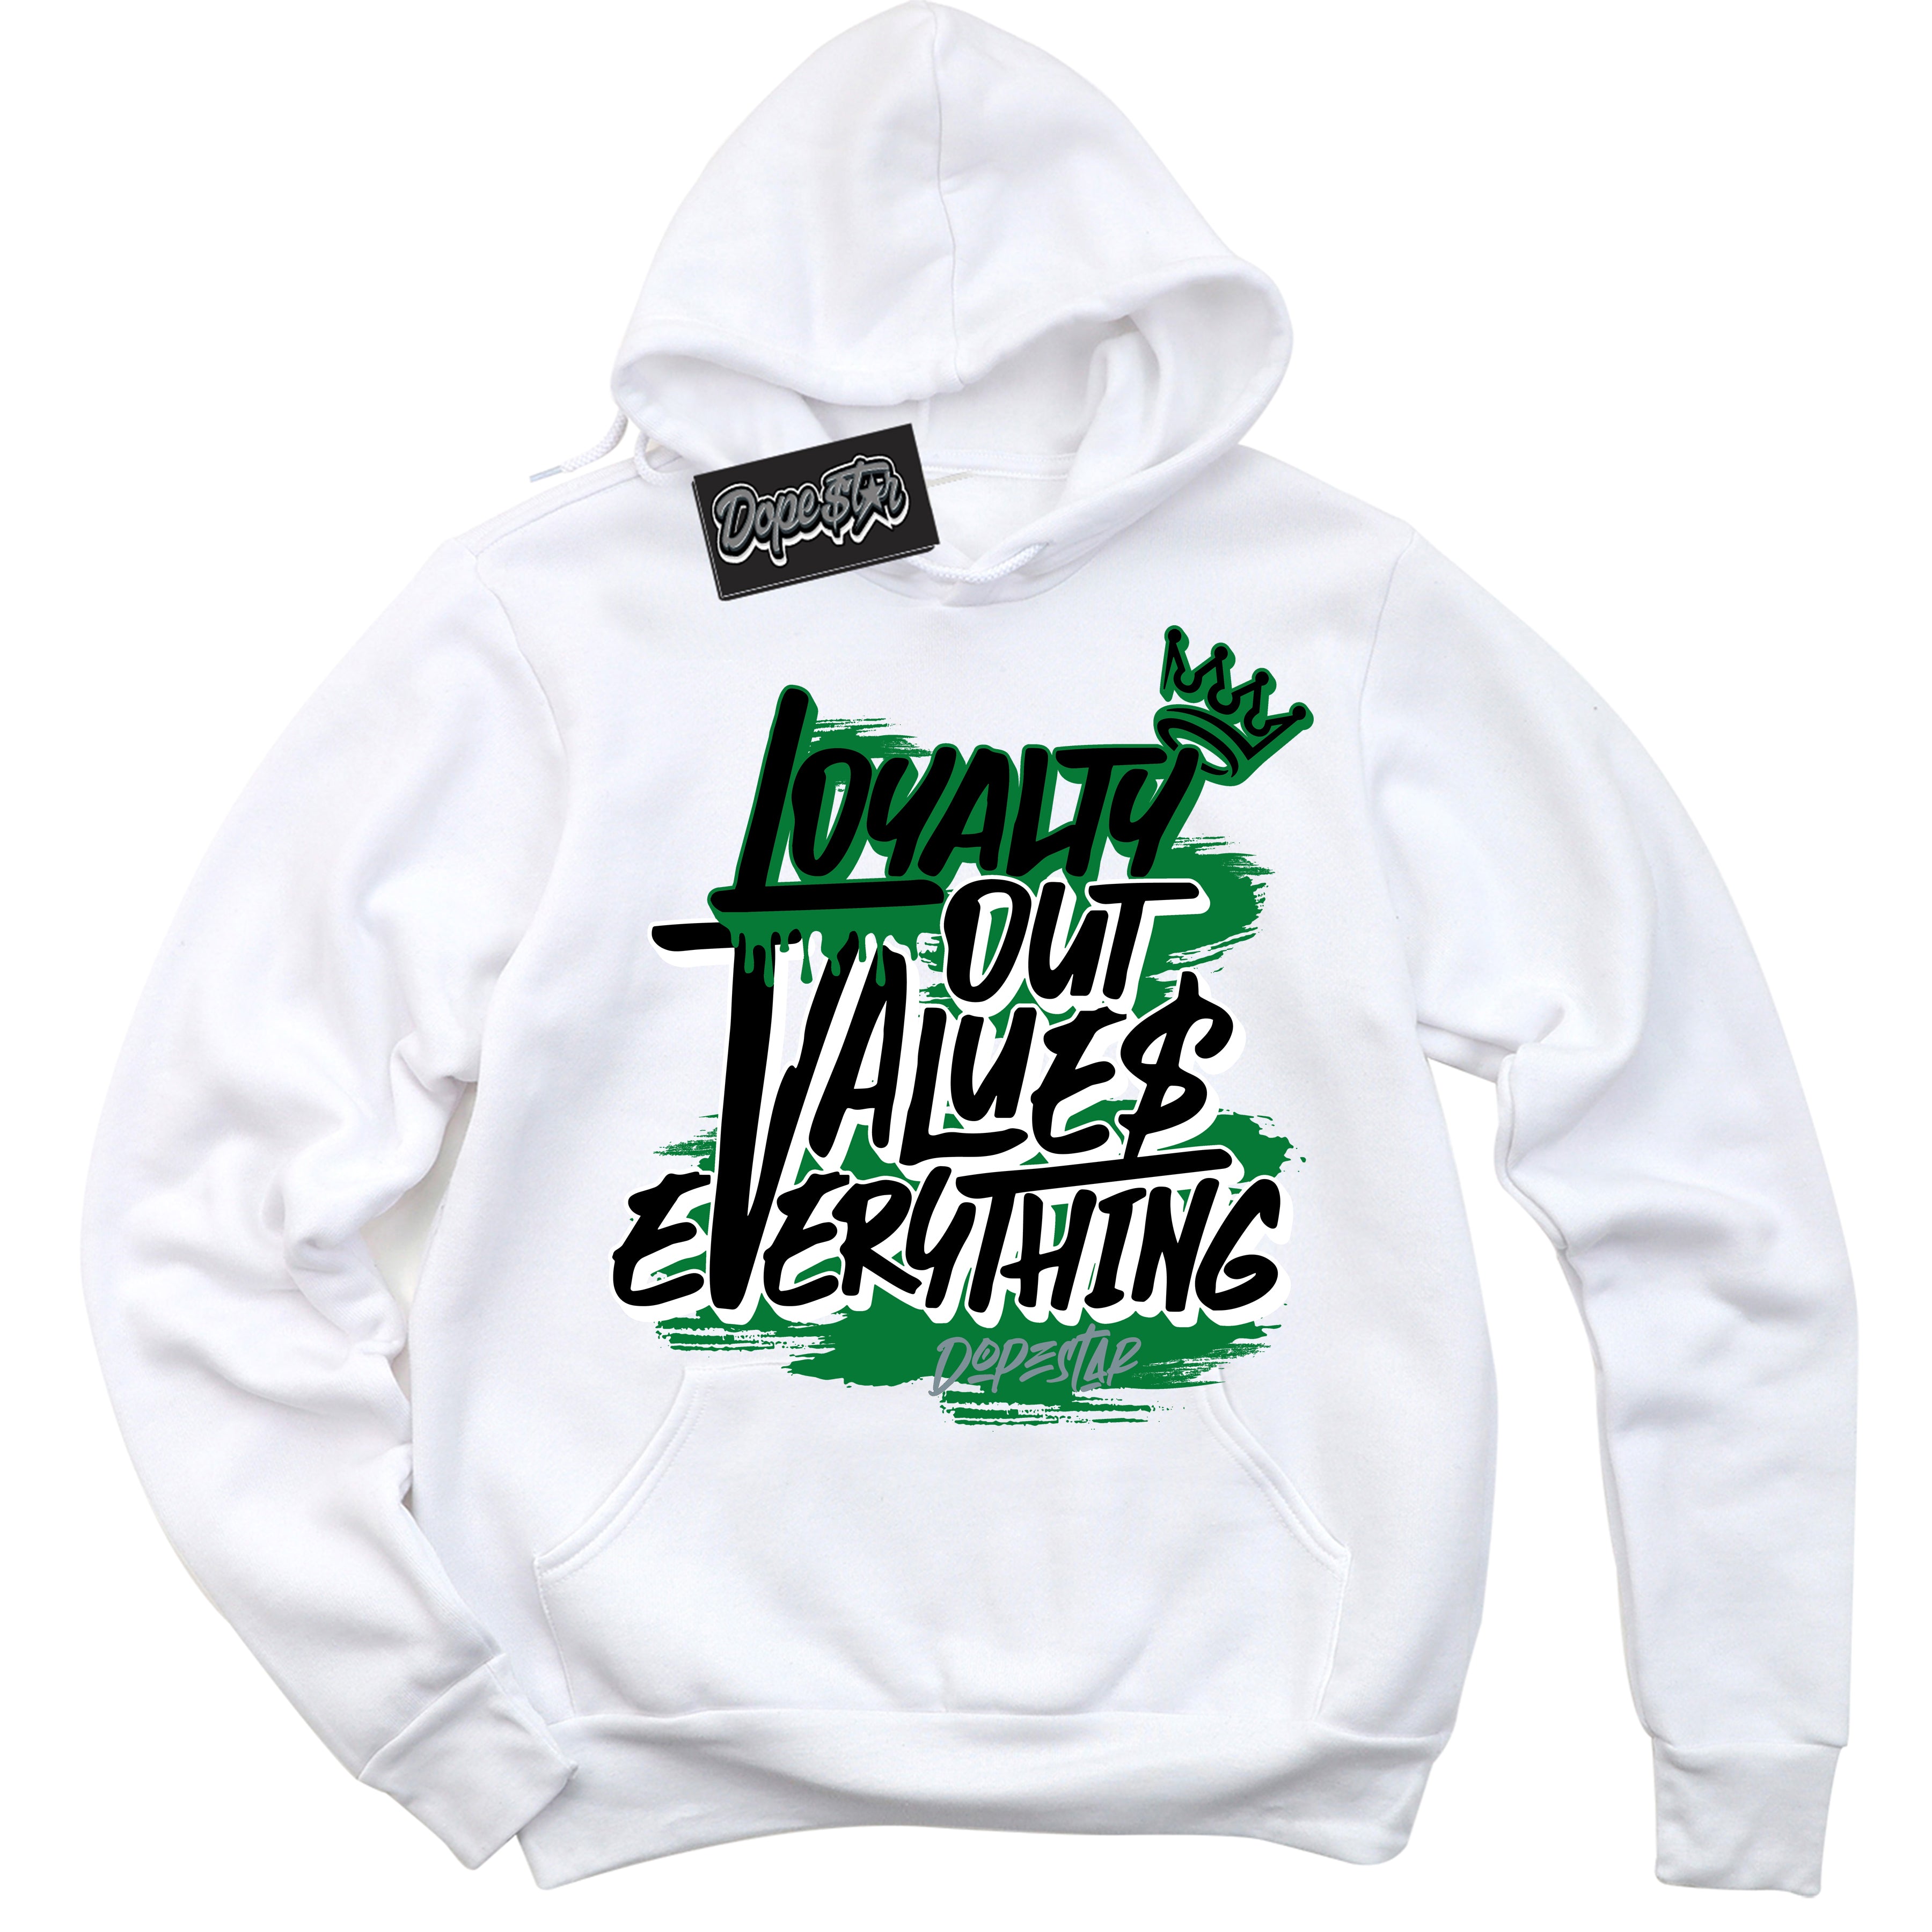 Cool White Hoodie with “ Loyalty Out Values Everything ”  design that Perfectly Matches Lucky Green 5s Sneakers.